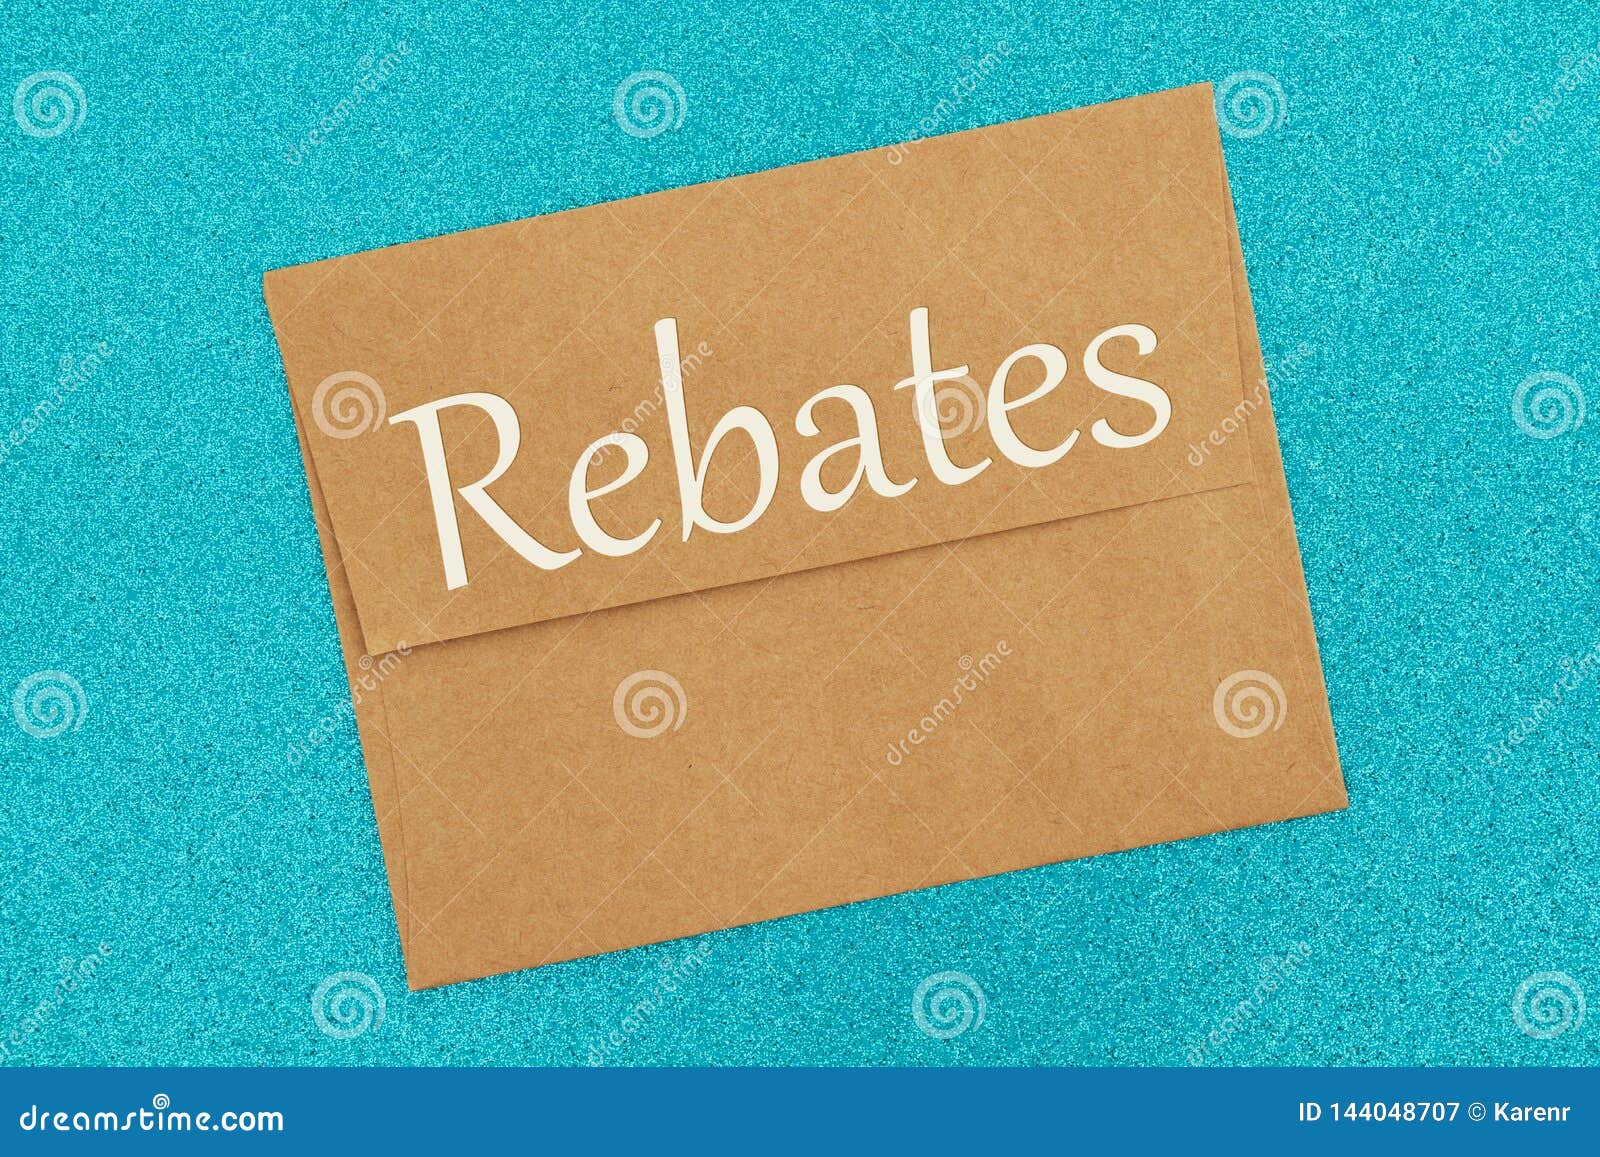 rebates-text-on-a-brown-envelope-stock-image-image-of-turquoise